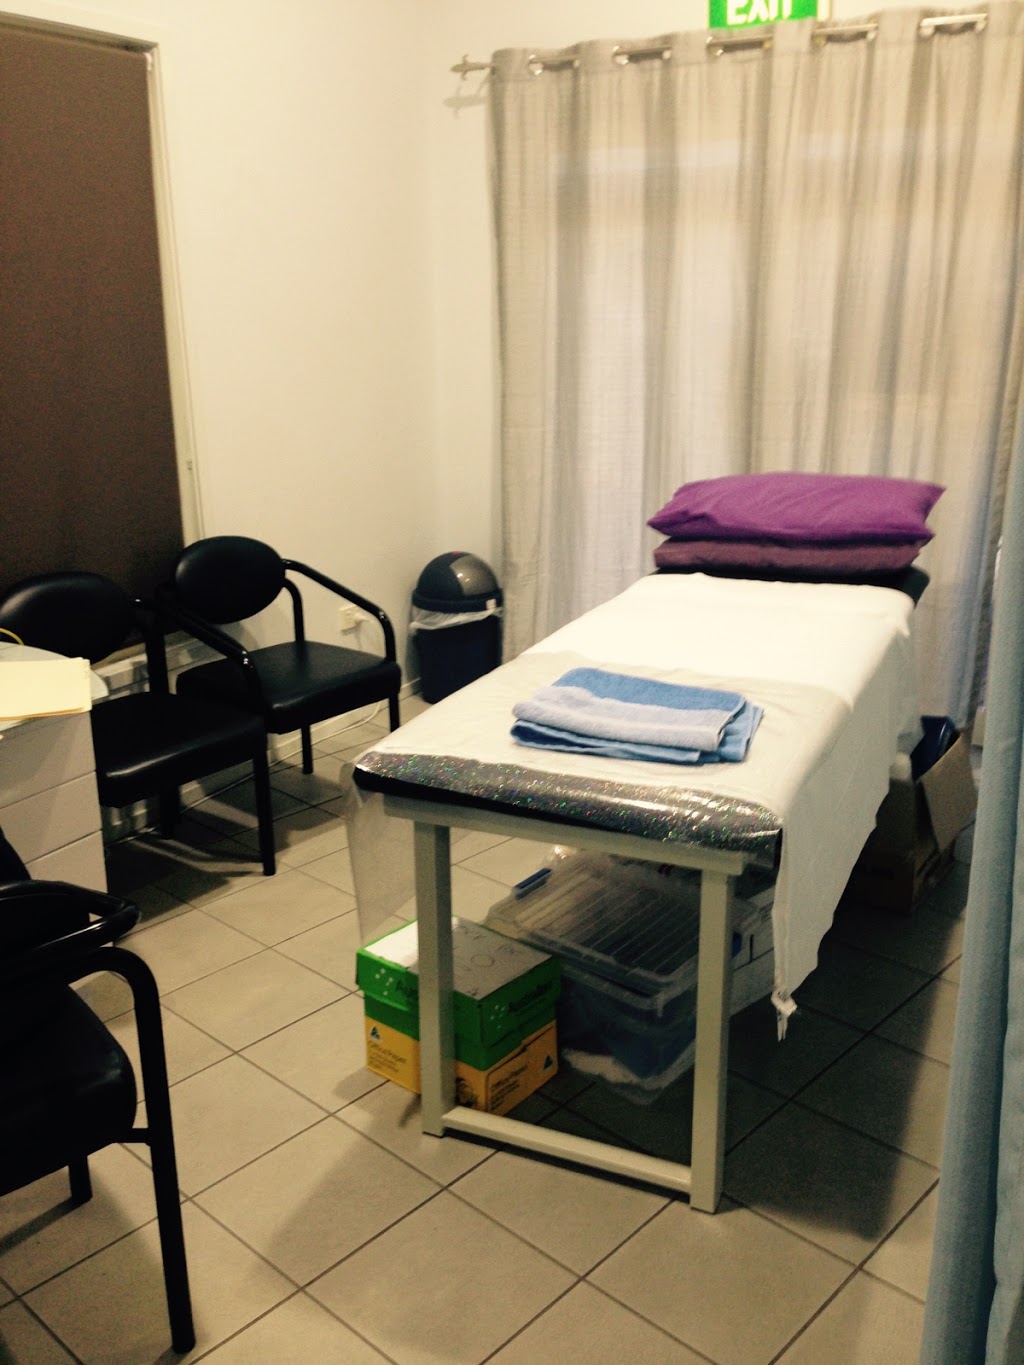 Active Physio Health | physiotherapist | 2 Rafting Ground Rd, Agnes Water QLD 4677, Australia | 0749725155 OR +61 7 4972 5155